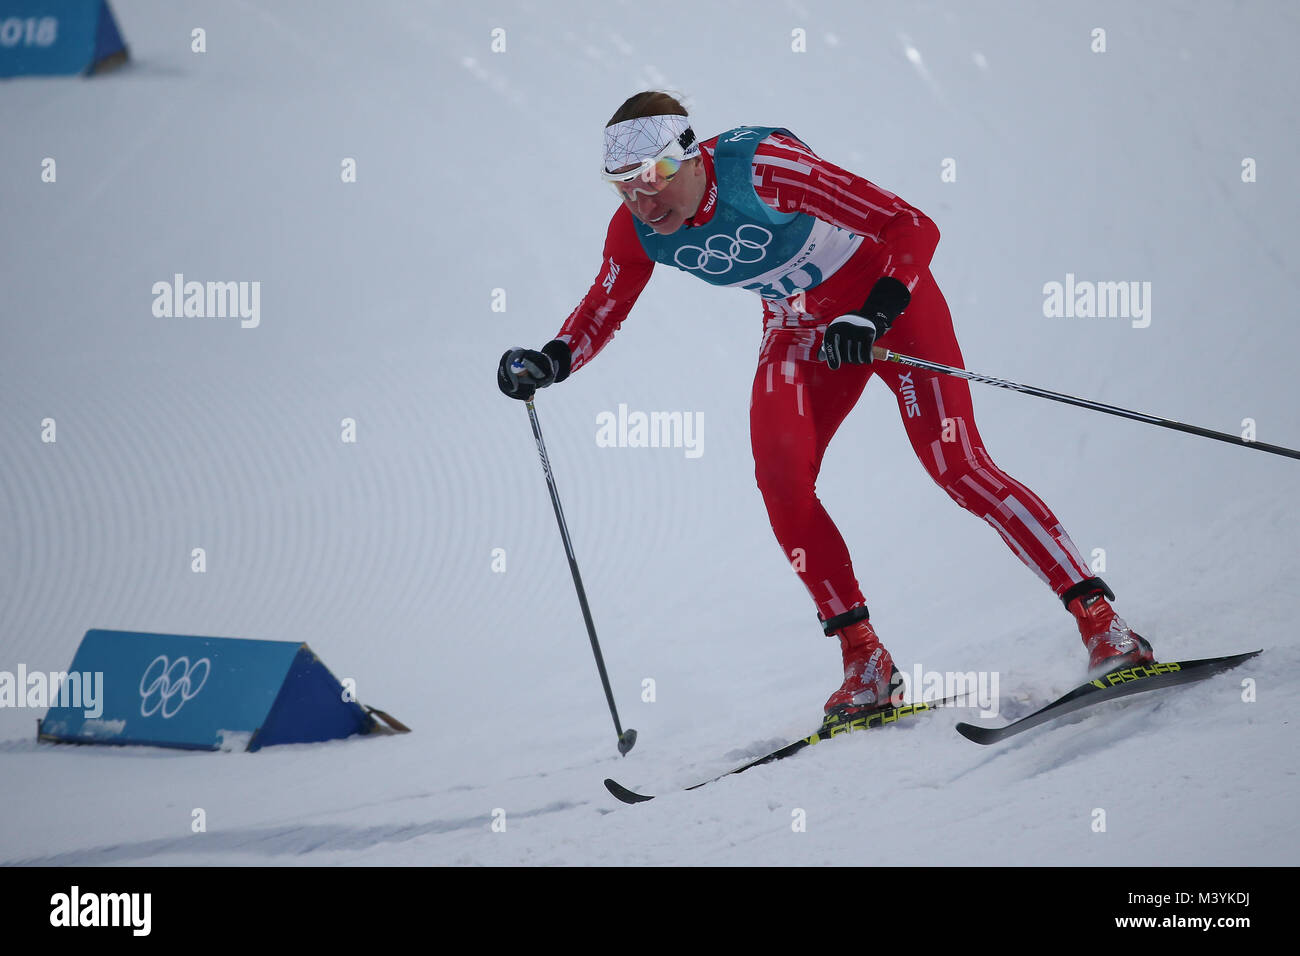 PyeongChang, South Korea. 13th Febraury, 2018. JUSTYNA KOWALCZYK   during the PyeongChang 2018 Olympic Games on February 13, 2018 in PyeongChang, South Korea Credit: East News sp. z o.o./Alamy Live News Stock Photo